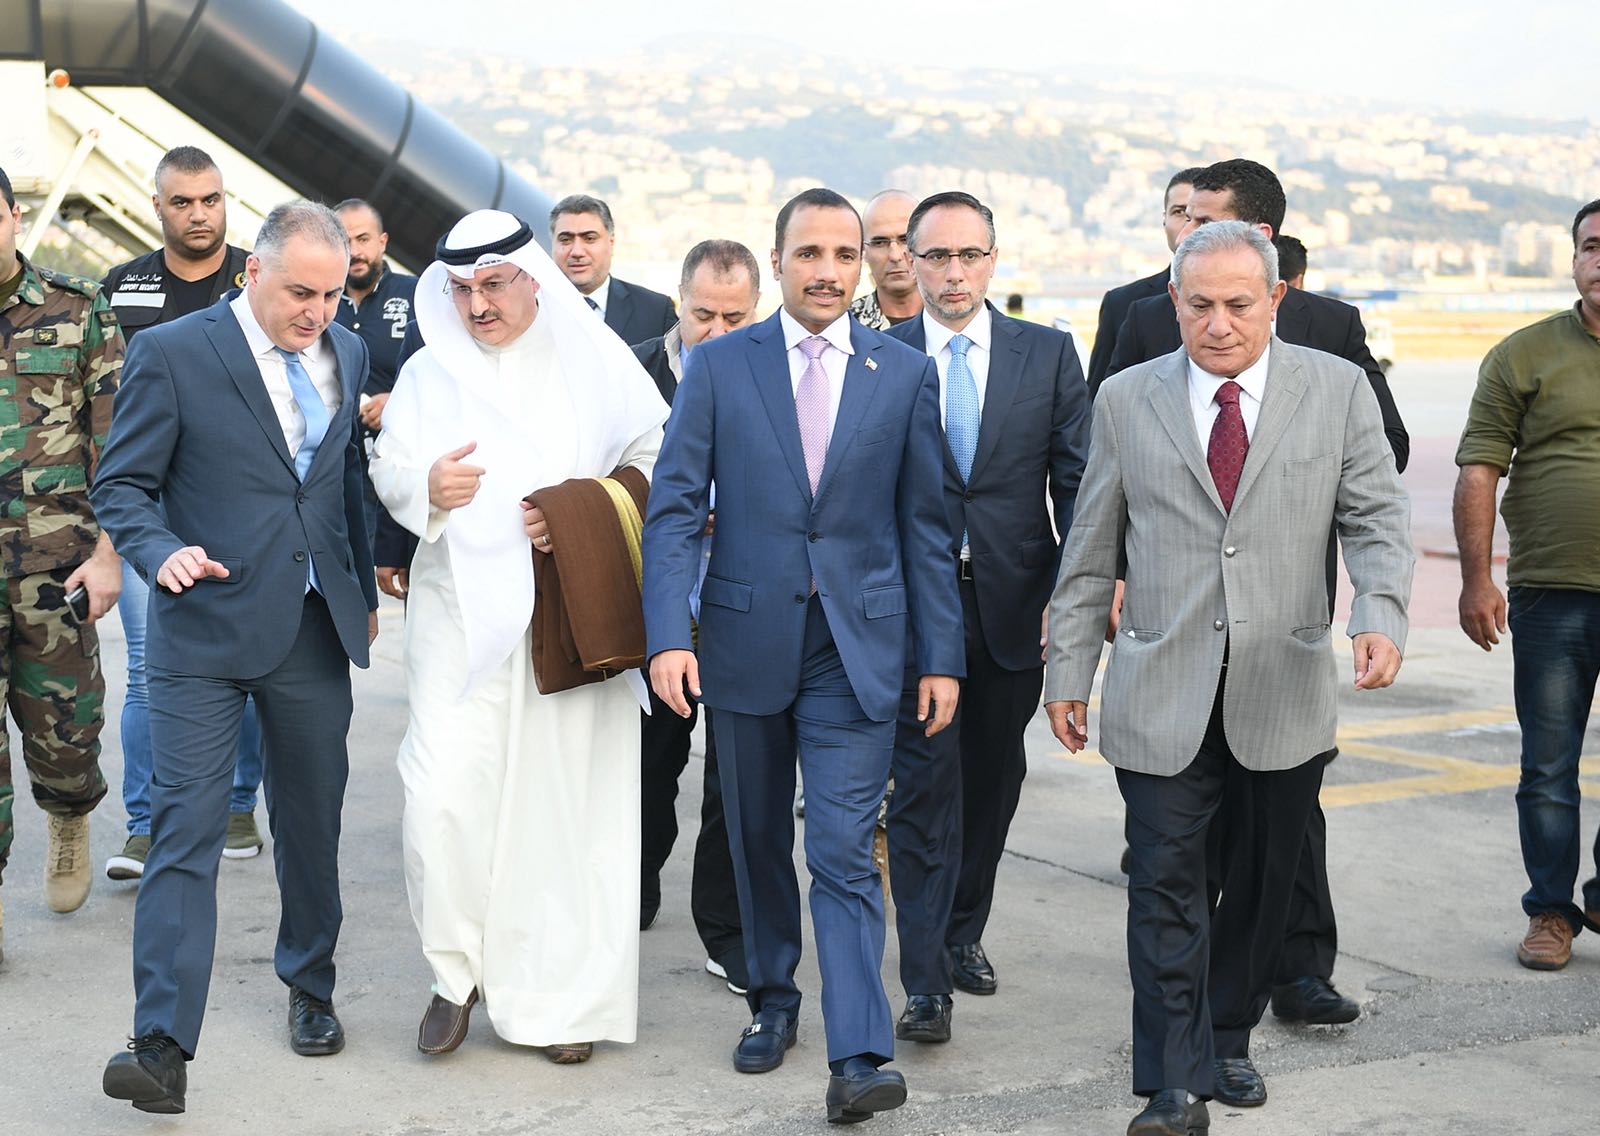 Kuwaiti National Assembly Speaker Marzouq Al-Ghanim arrived in Beirut to attend the 26th edition of the Arab Economic Forum